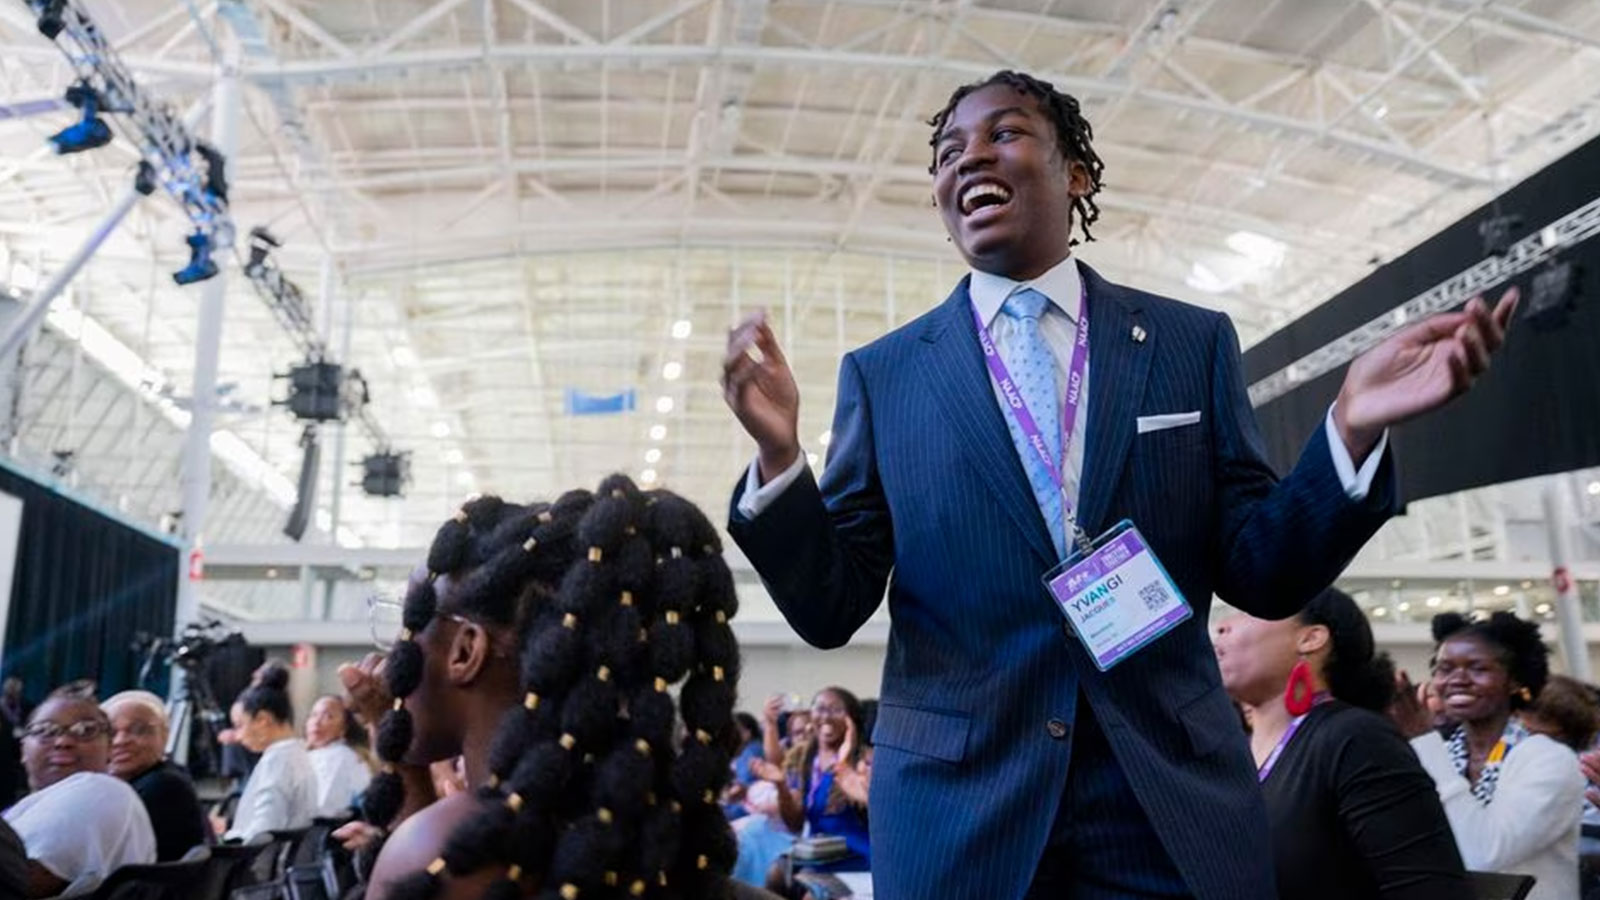 Yvangi Jacques, of Brockton, stood up after winning an award at the 46th NAACP ACT-SO Awards at the NAACP National Convention in Boston Saturday. 